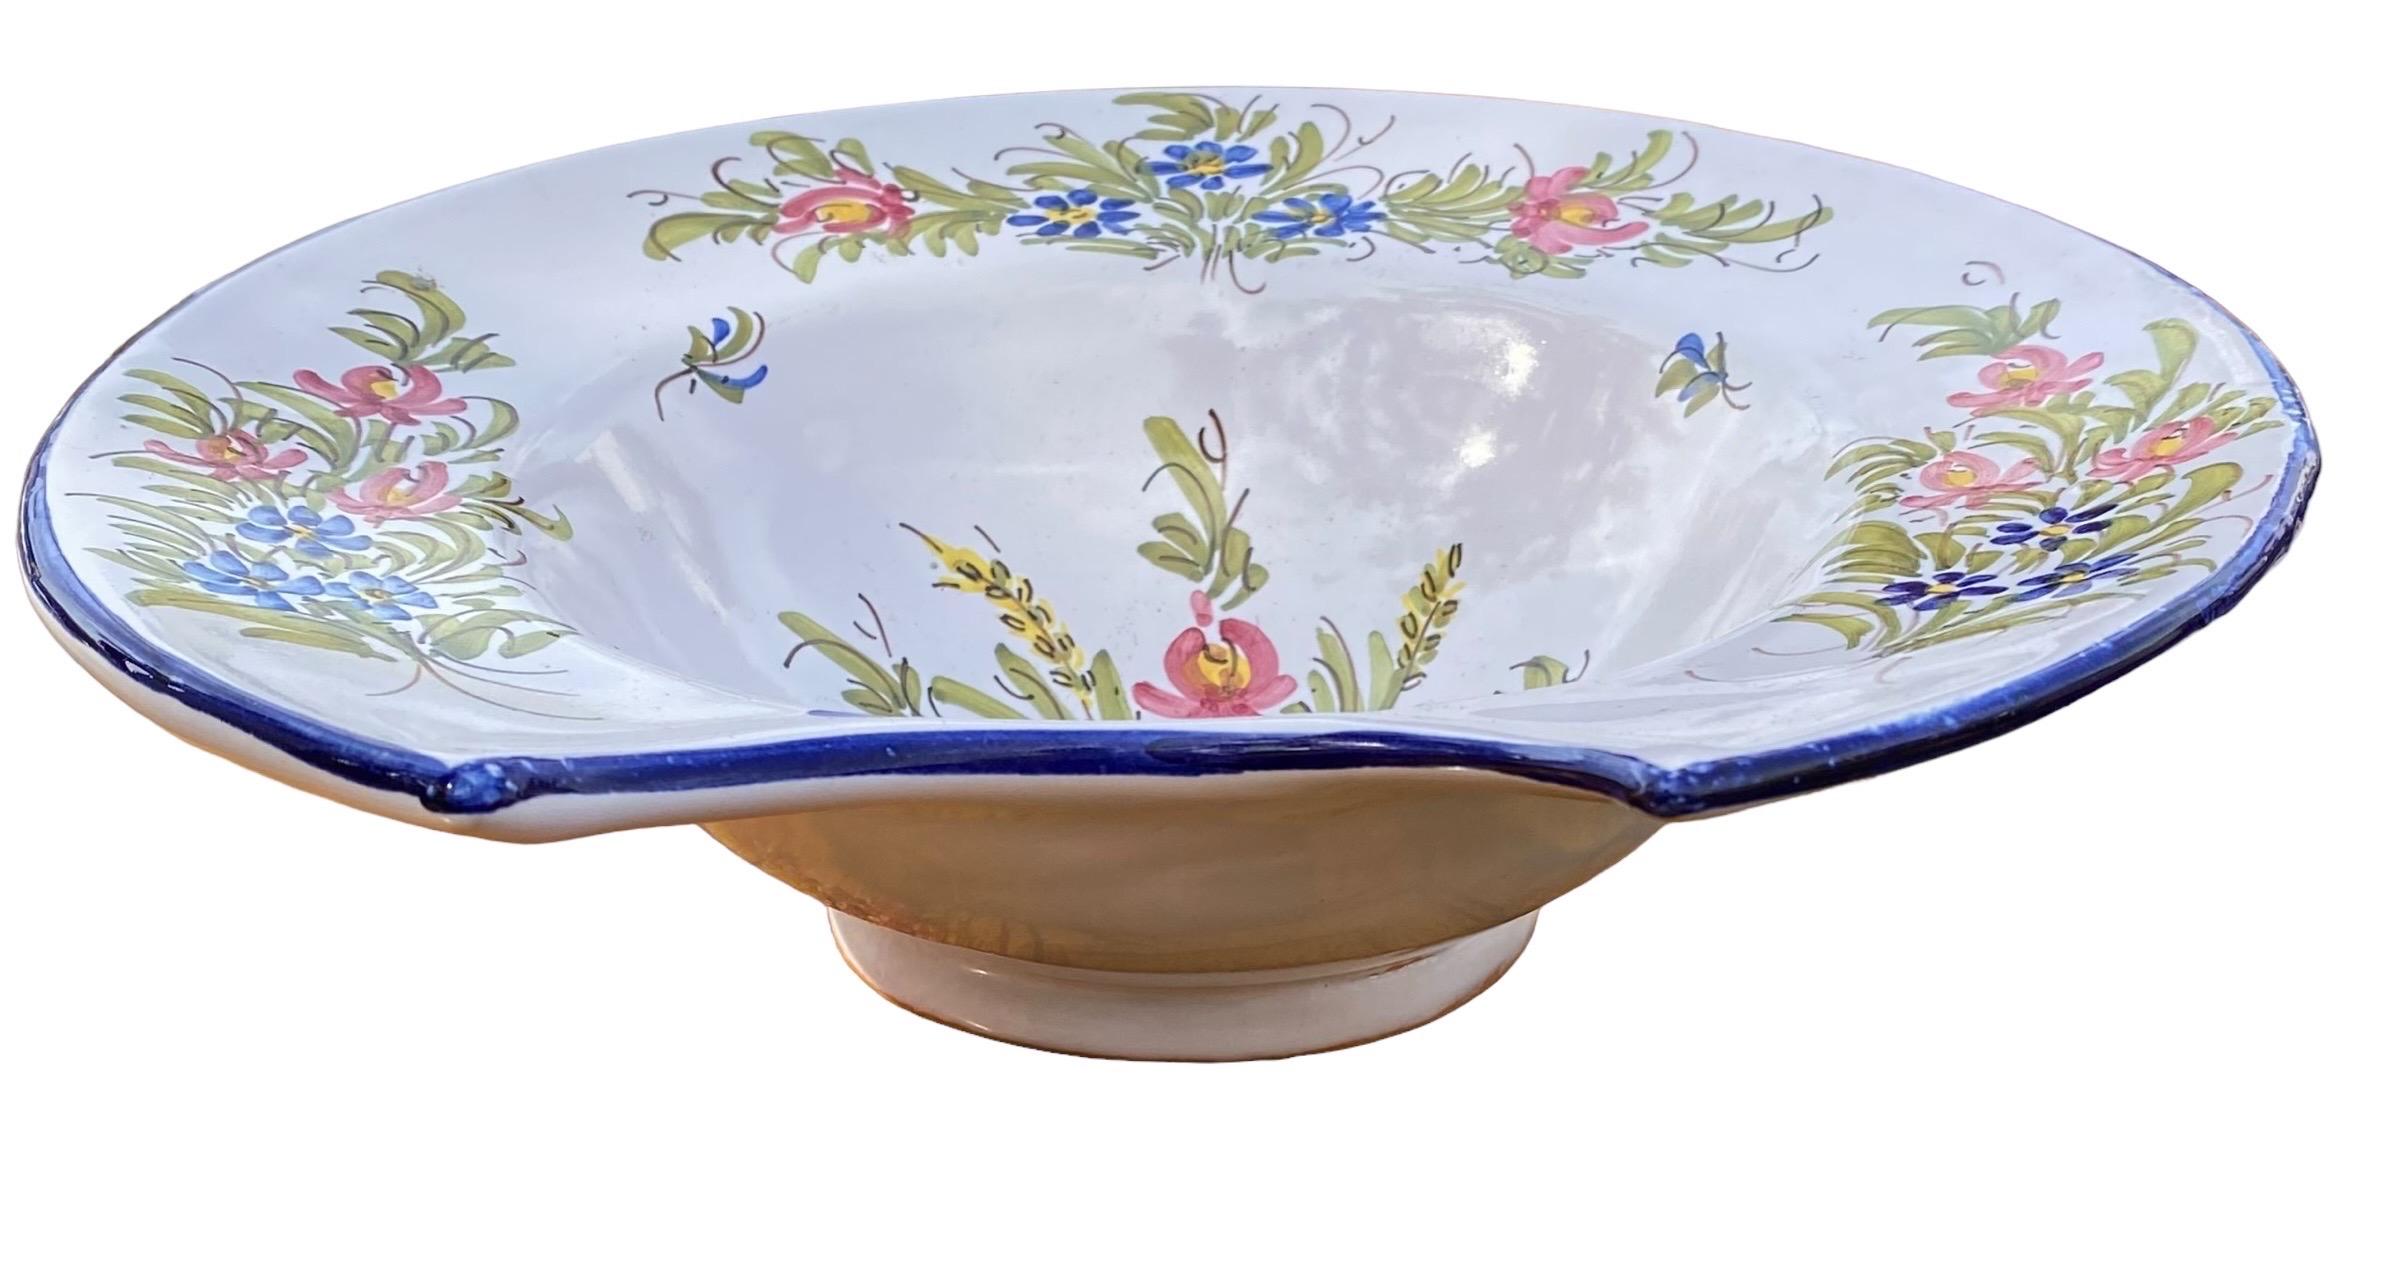 An iconic piece of French history Is this antique French Faience plat a barbe (Barber's Bowl) created by bolosunes masters in Samadet, a commune in Landes, in southwestern France, having beautifully hand painted decoration in provincial colors of